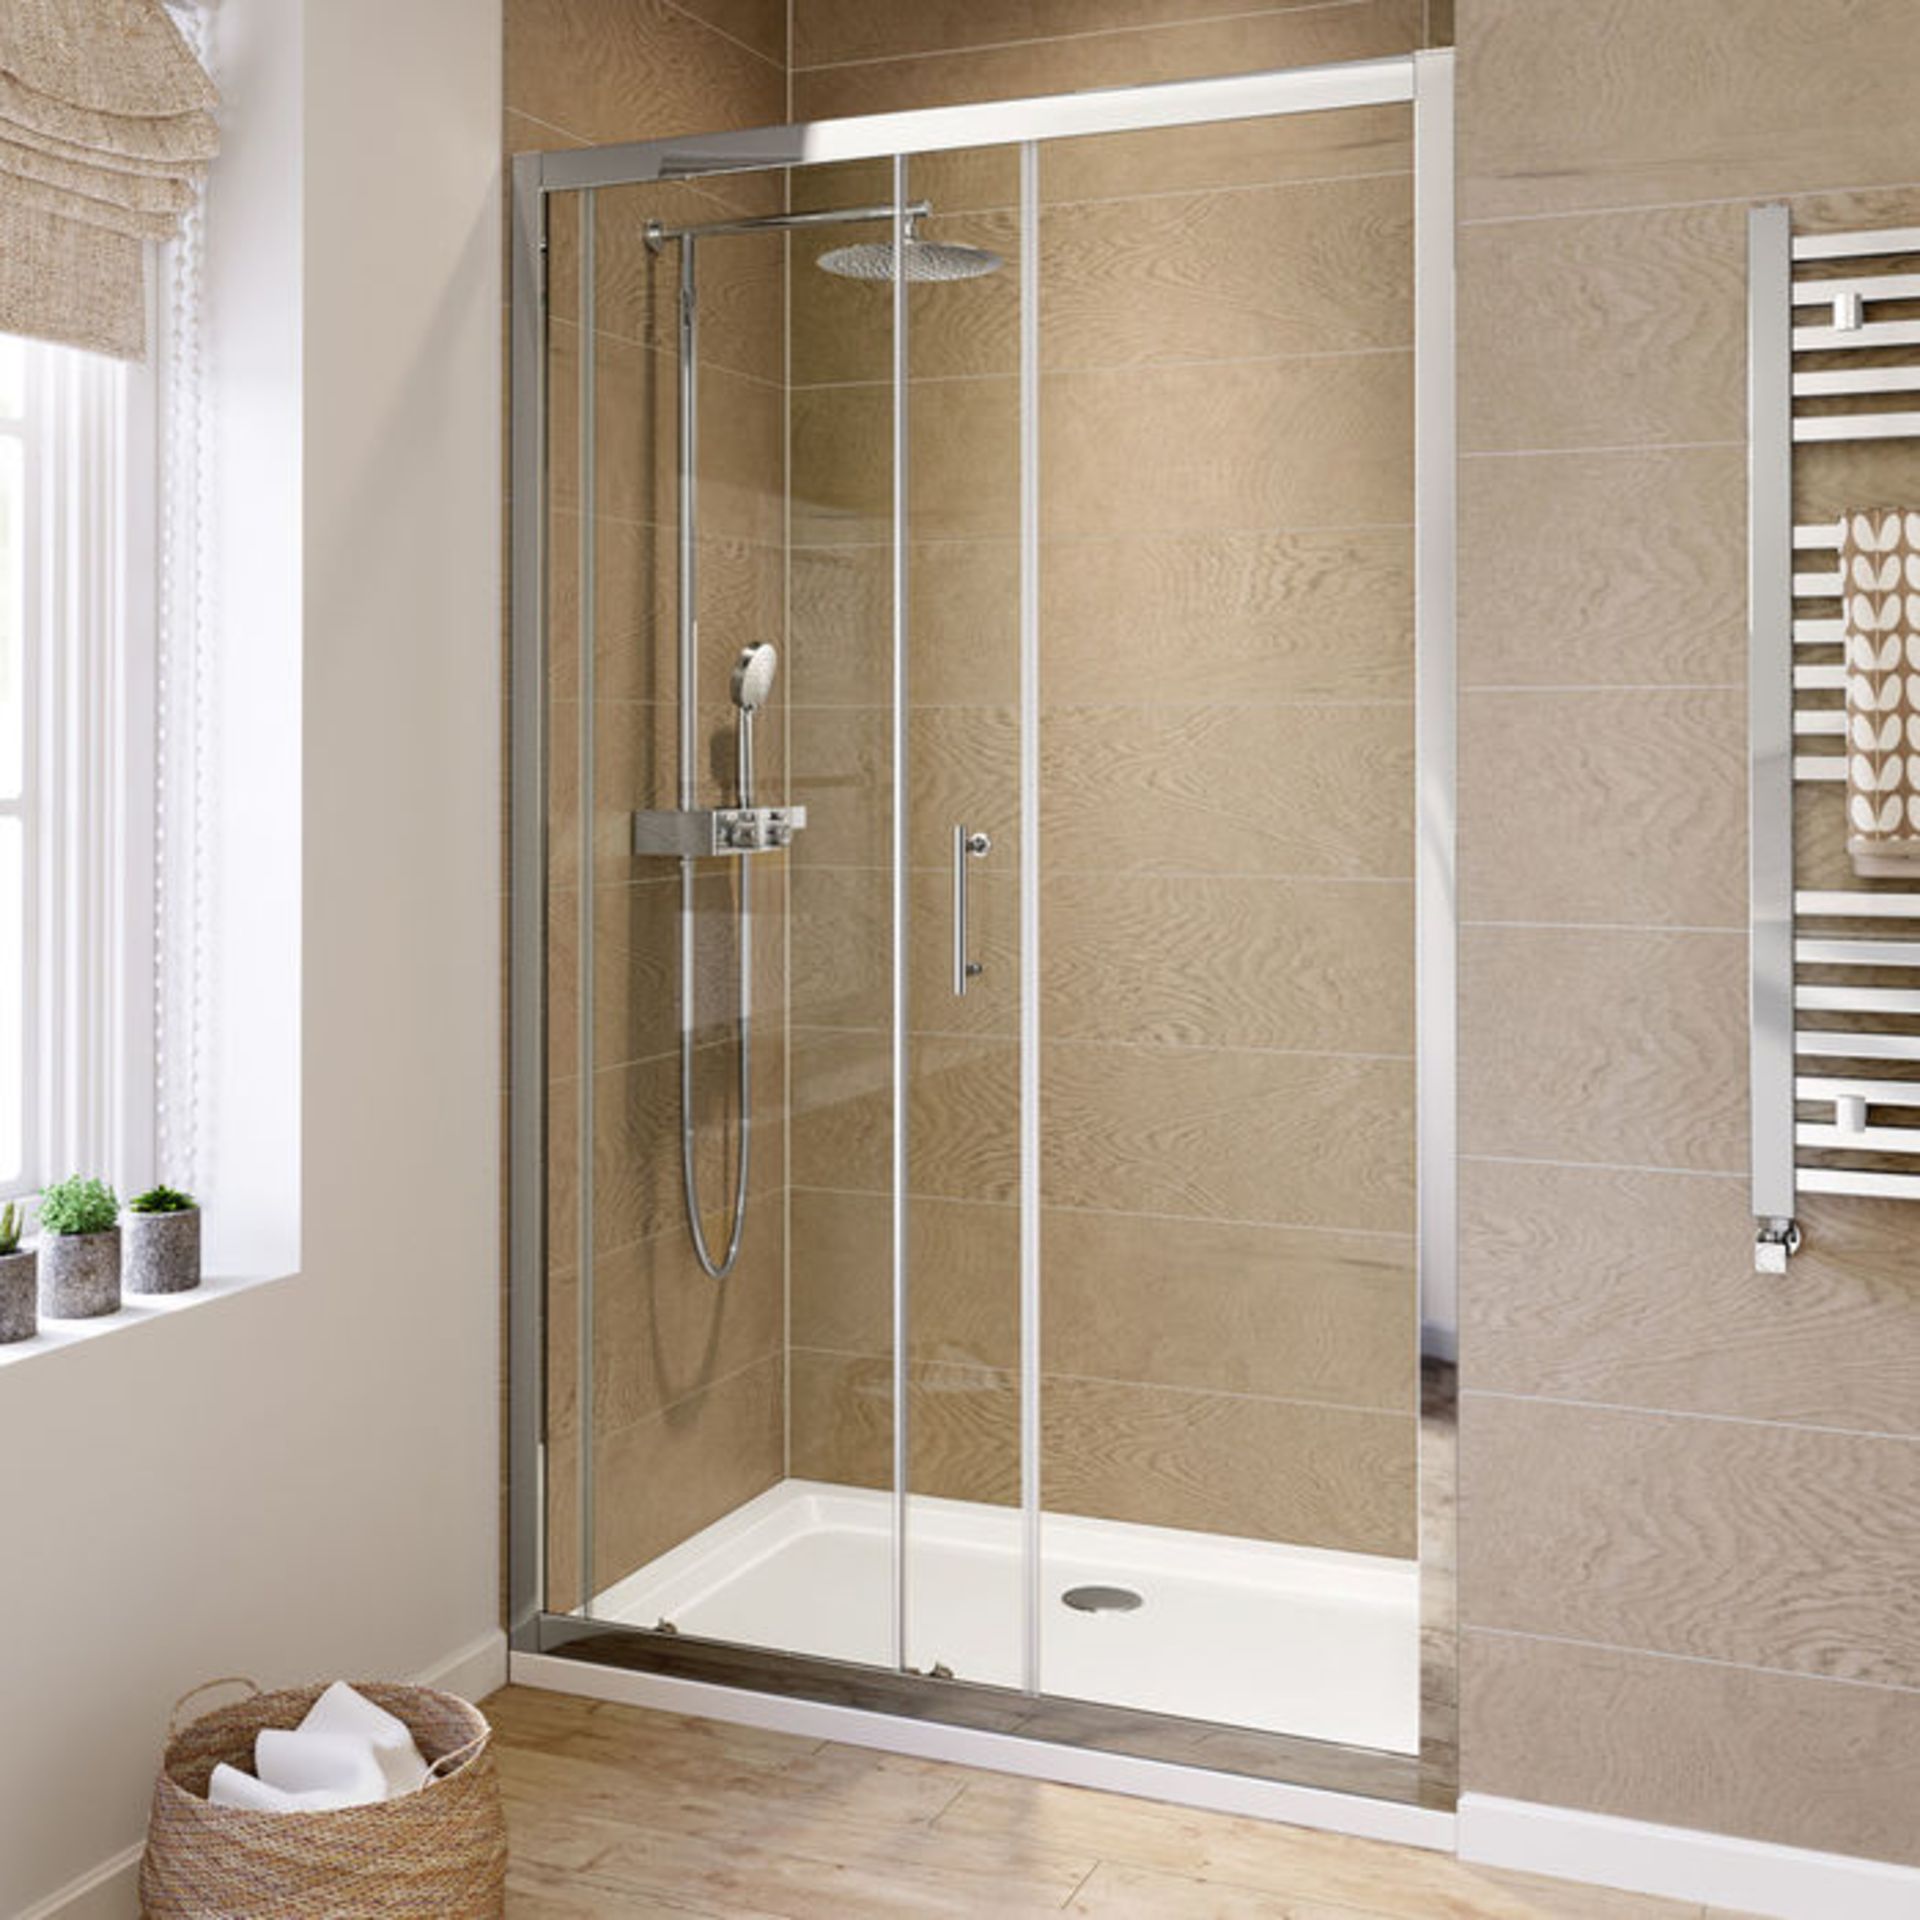 (PO145) 1200mm - 6mm - Elements Sliding Shower Door. RRP £299.99. 6mm Safety GlassFully waterproof